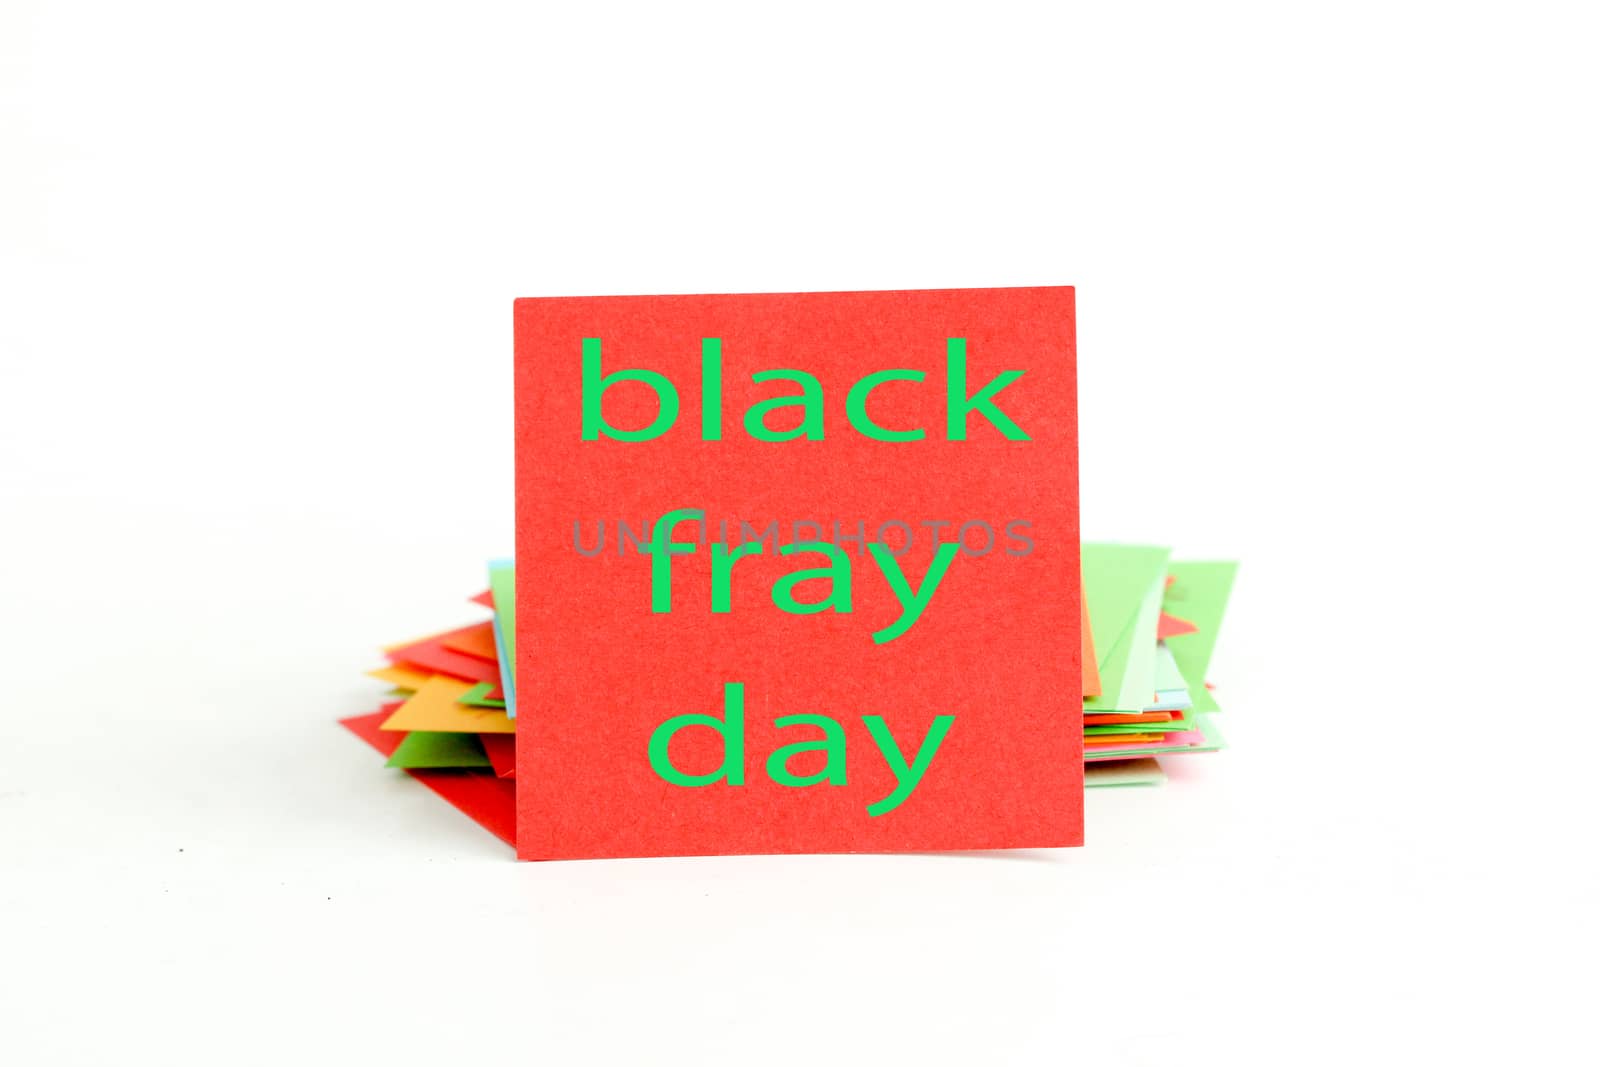 picture of a red note paper with text black friday